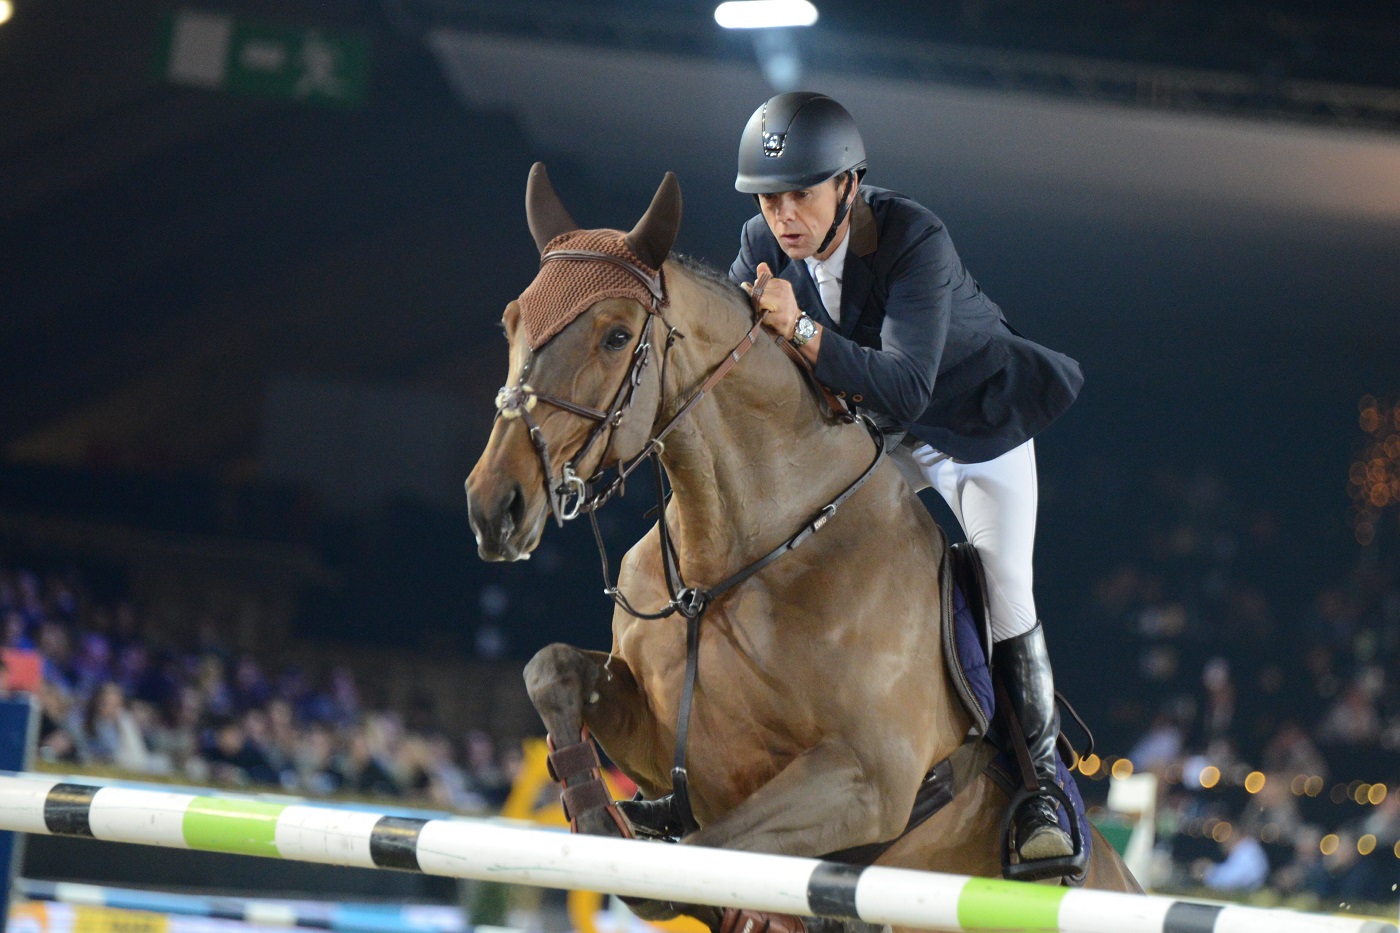 Wilm Vermeir is a second faster in Christmas Tree Stakes Londen 1,50m